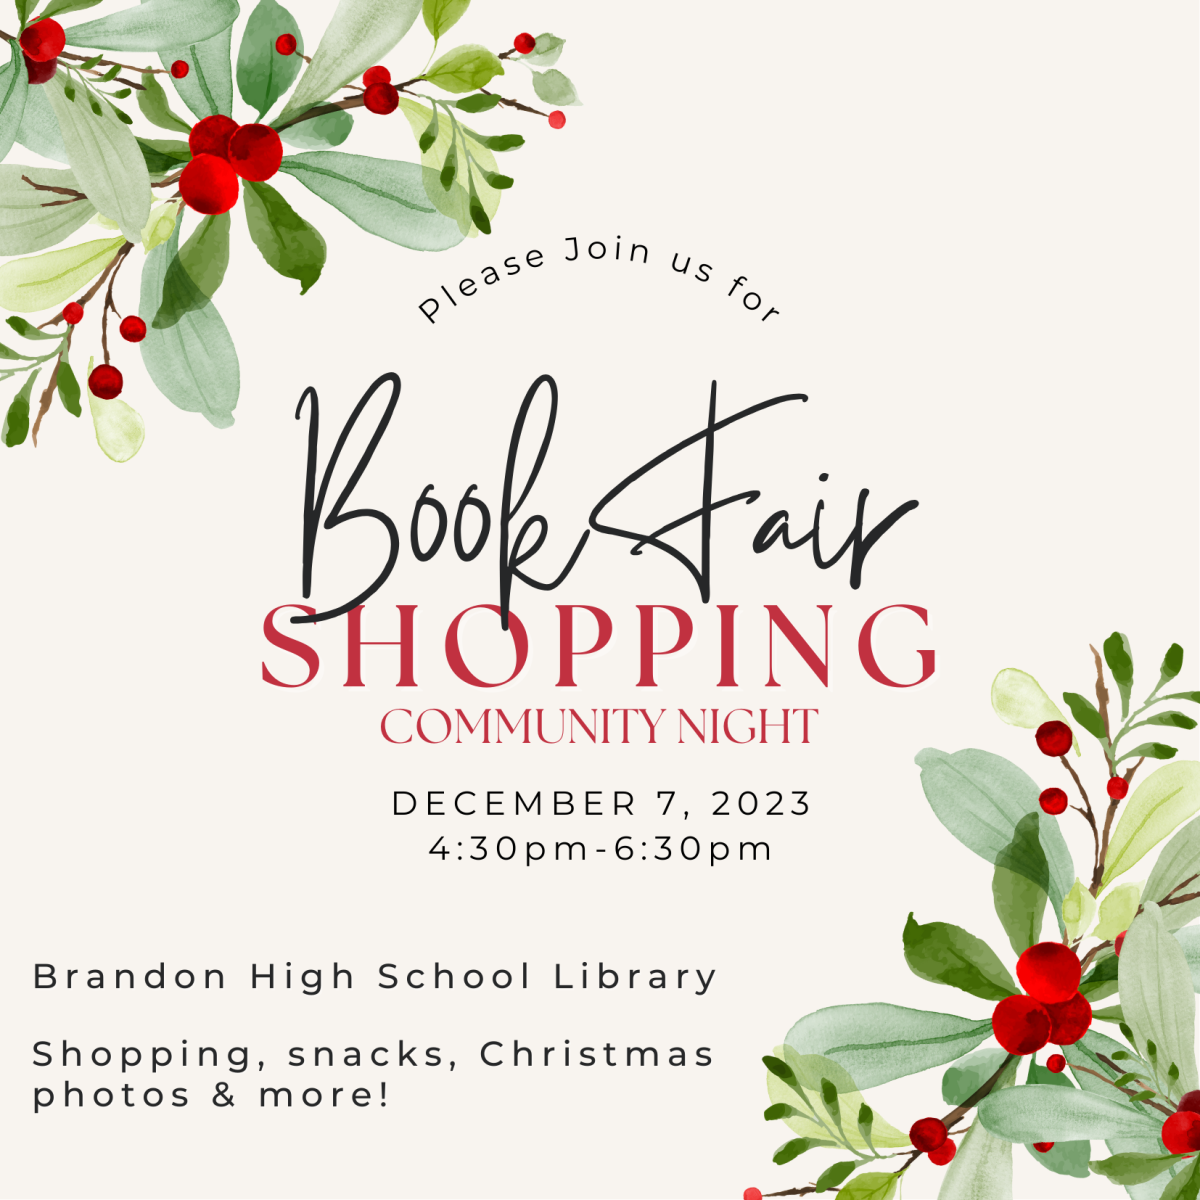 Please join us for the Book Fair Shopping Community Night on Thursday, December 7th from 4:30pm until 6:30 pm in the Brandon High School Library. Come enjoy shopping, snacks, and fun Christmas photos.